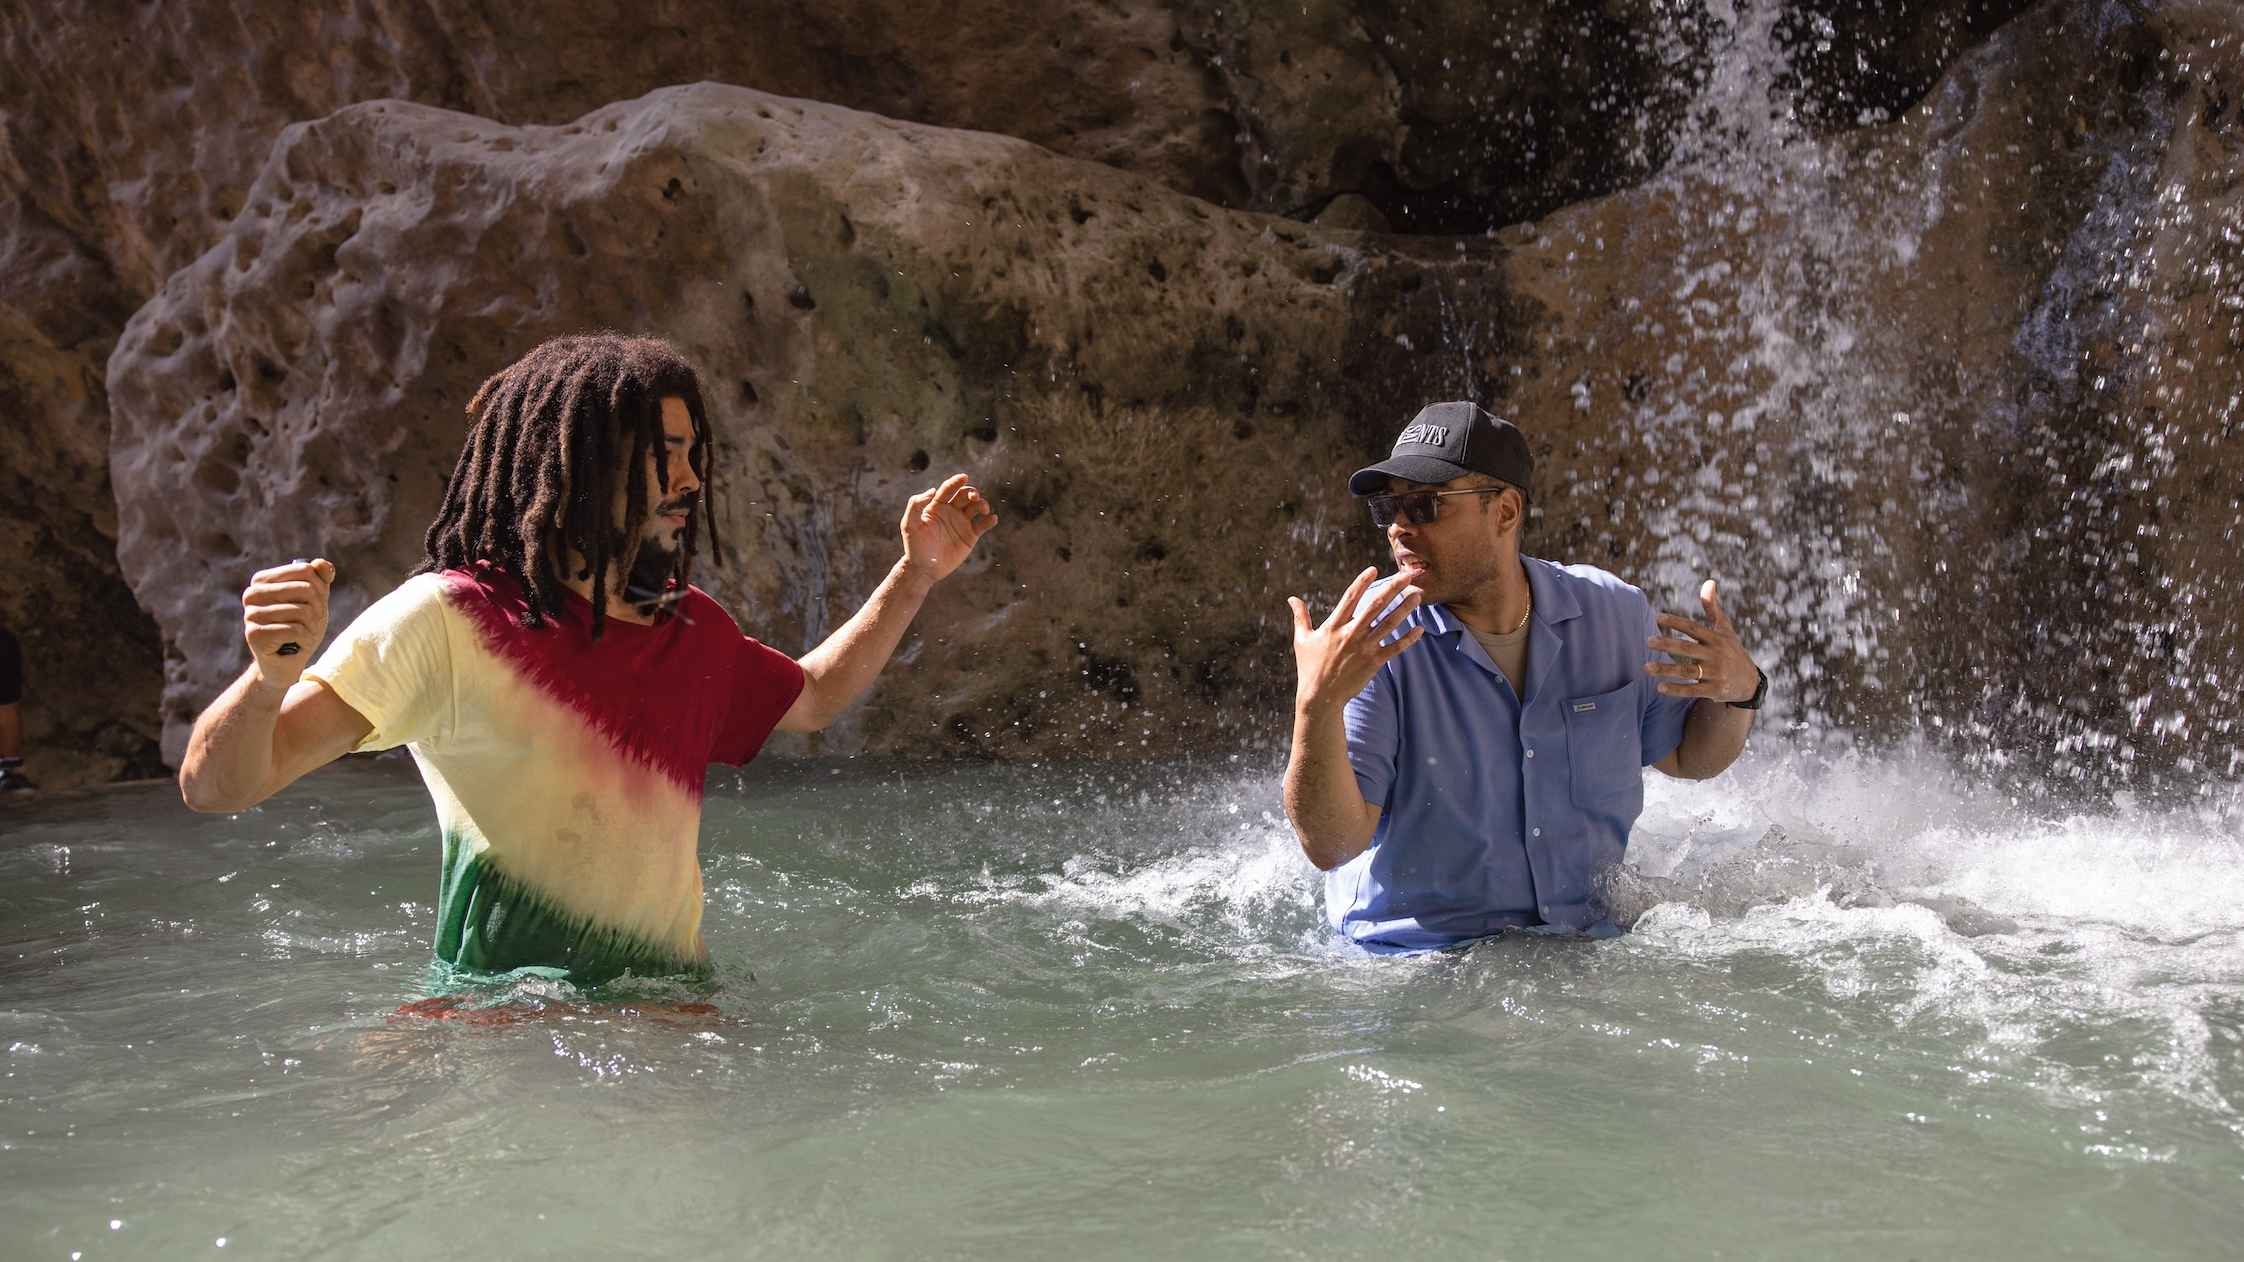 Kingsley Ben-Adir as “Bob Marley” and Director Reinaldo Marcus Green in Bob Marley: One Love from Paramount Pictures.